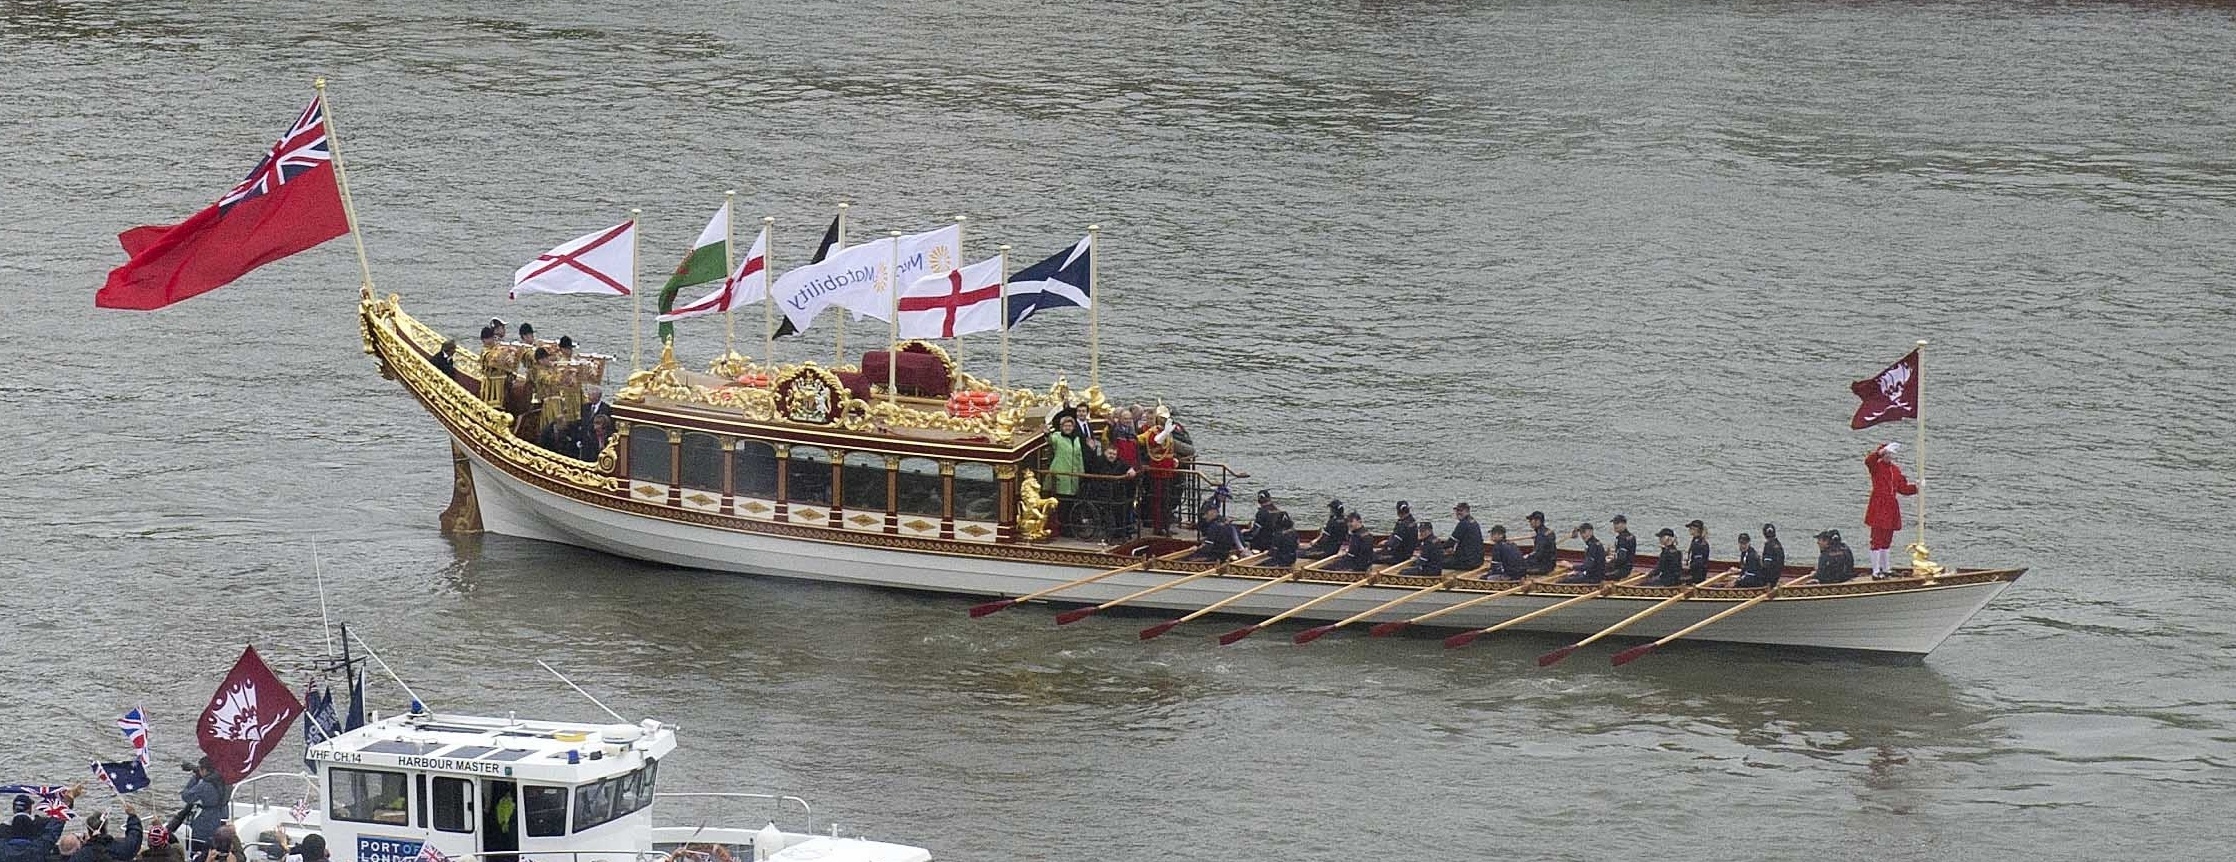 03-06-2012 Queens Diamond Jubilee Thames Pageant Photo by Phil Harris